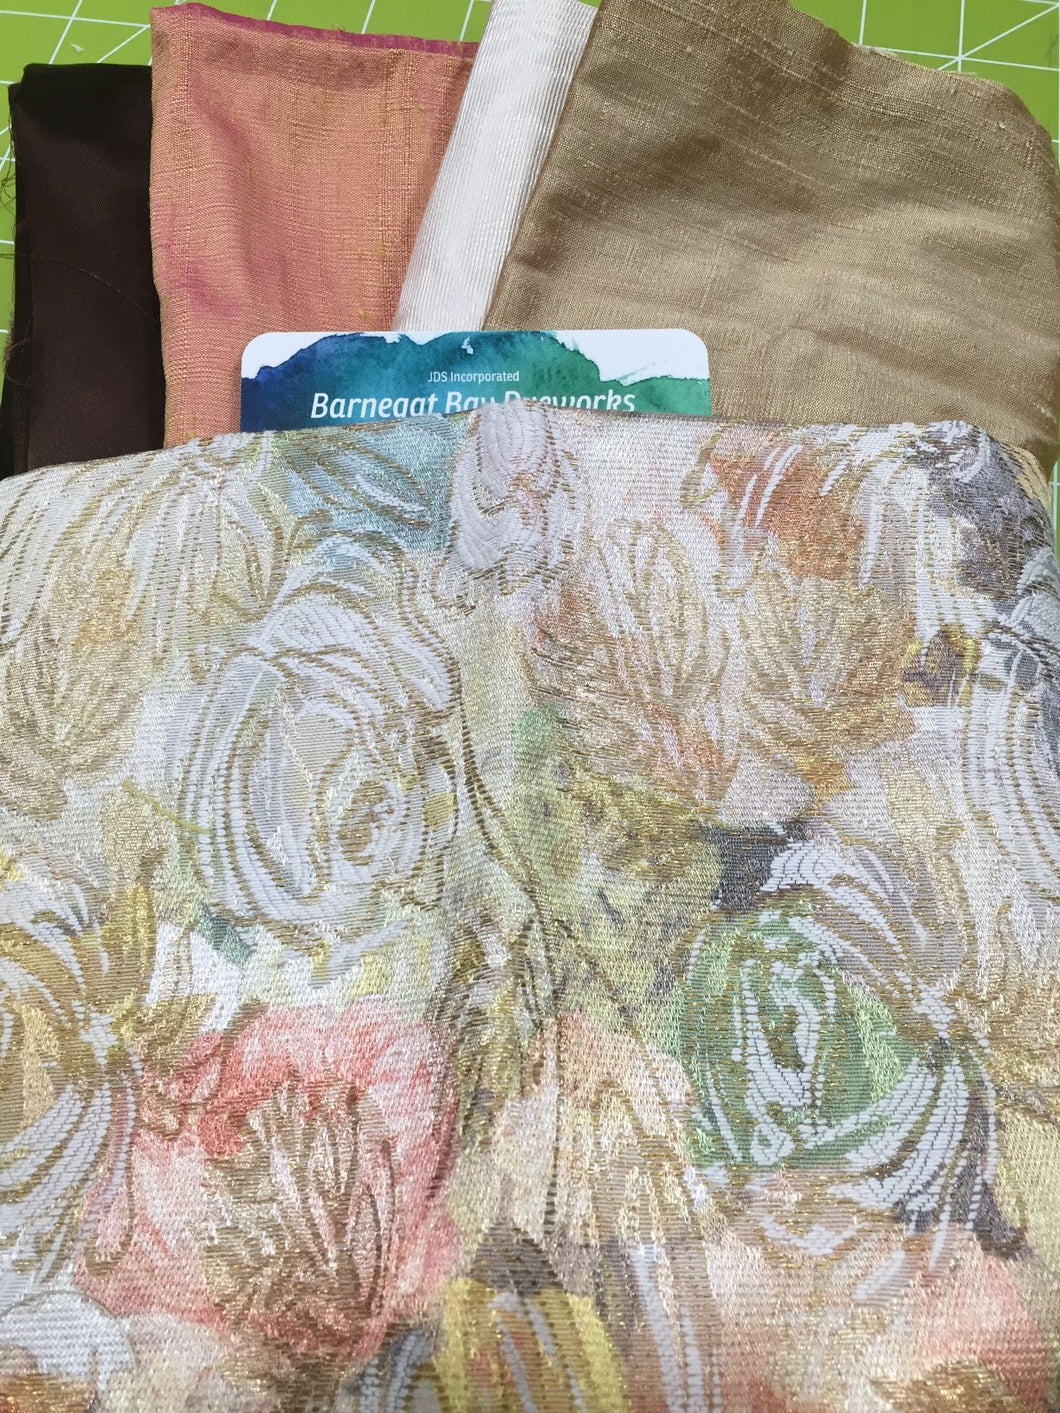 Crazy Quilt brics with a Brown & Peach Roses for the main fabrics and off white, peach, brown & light brown coordinateson